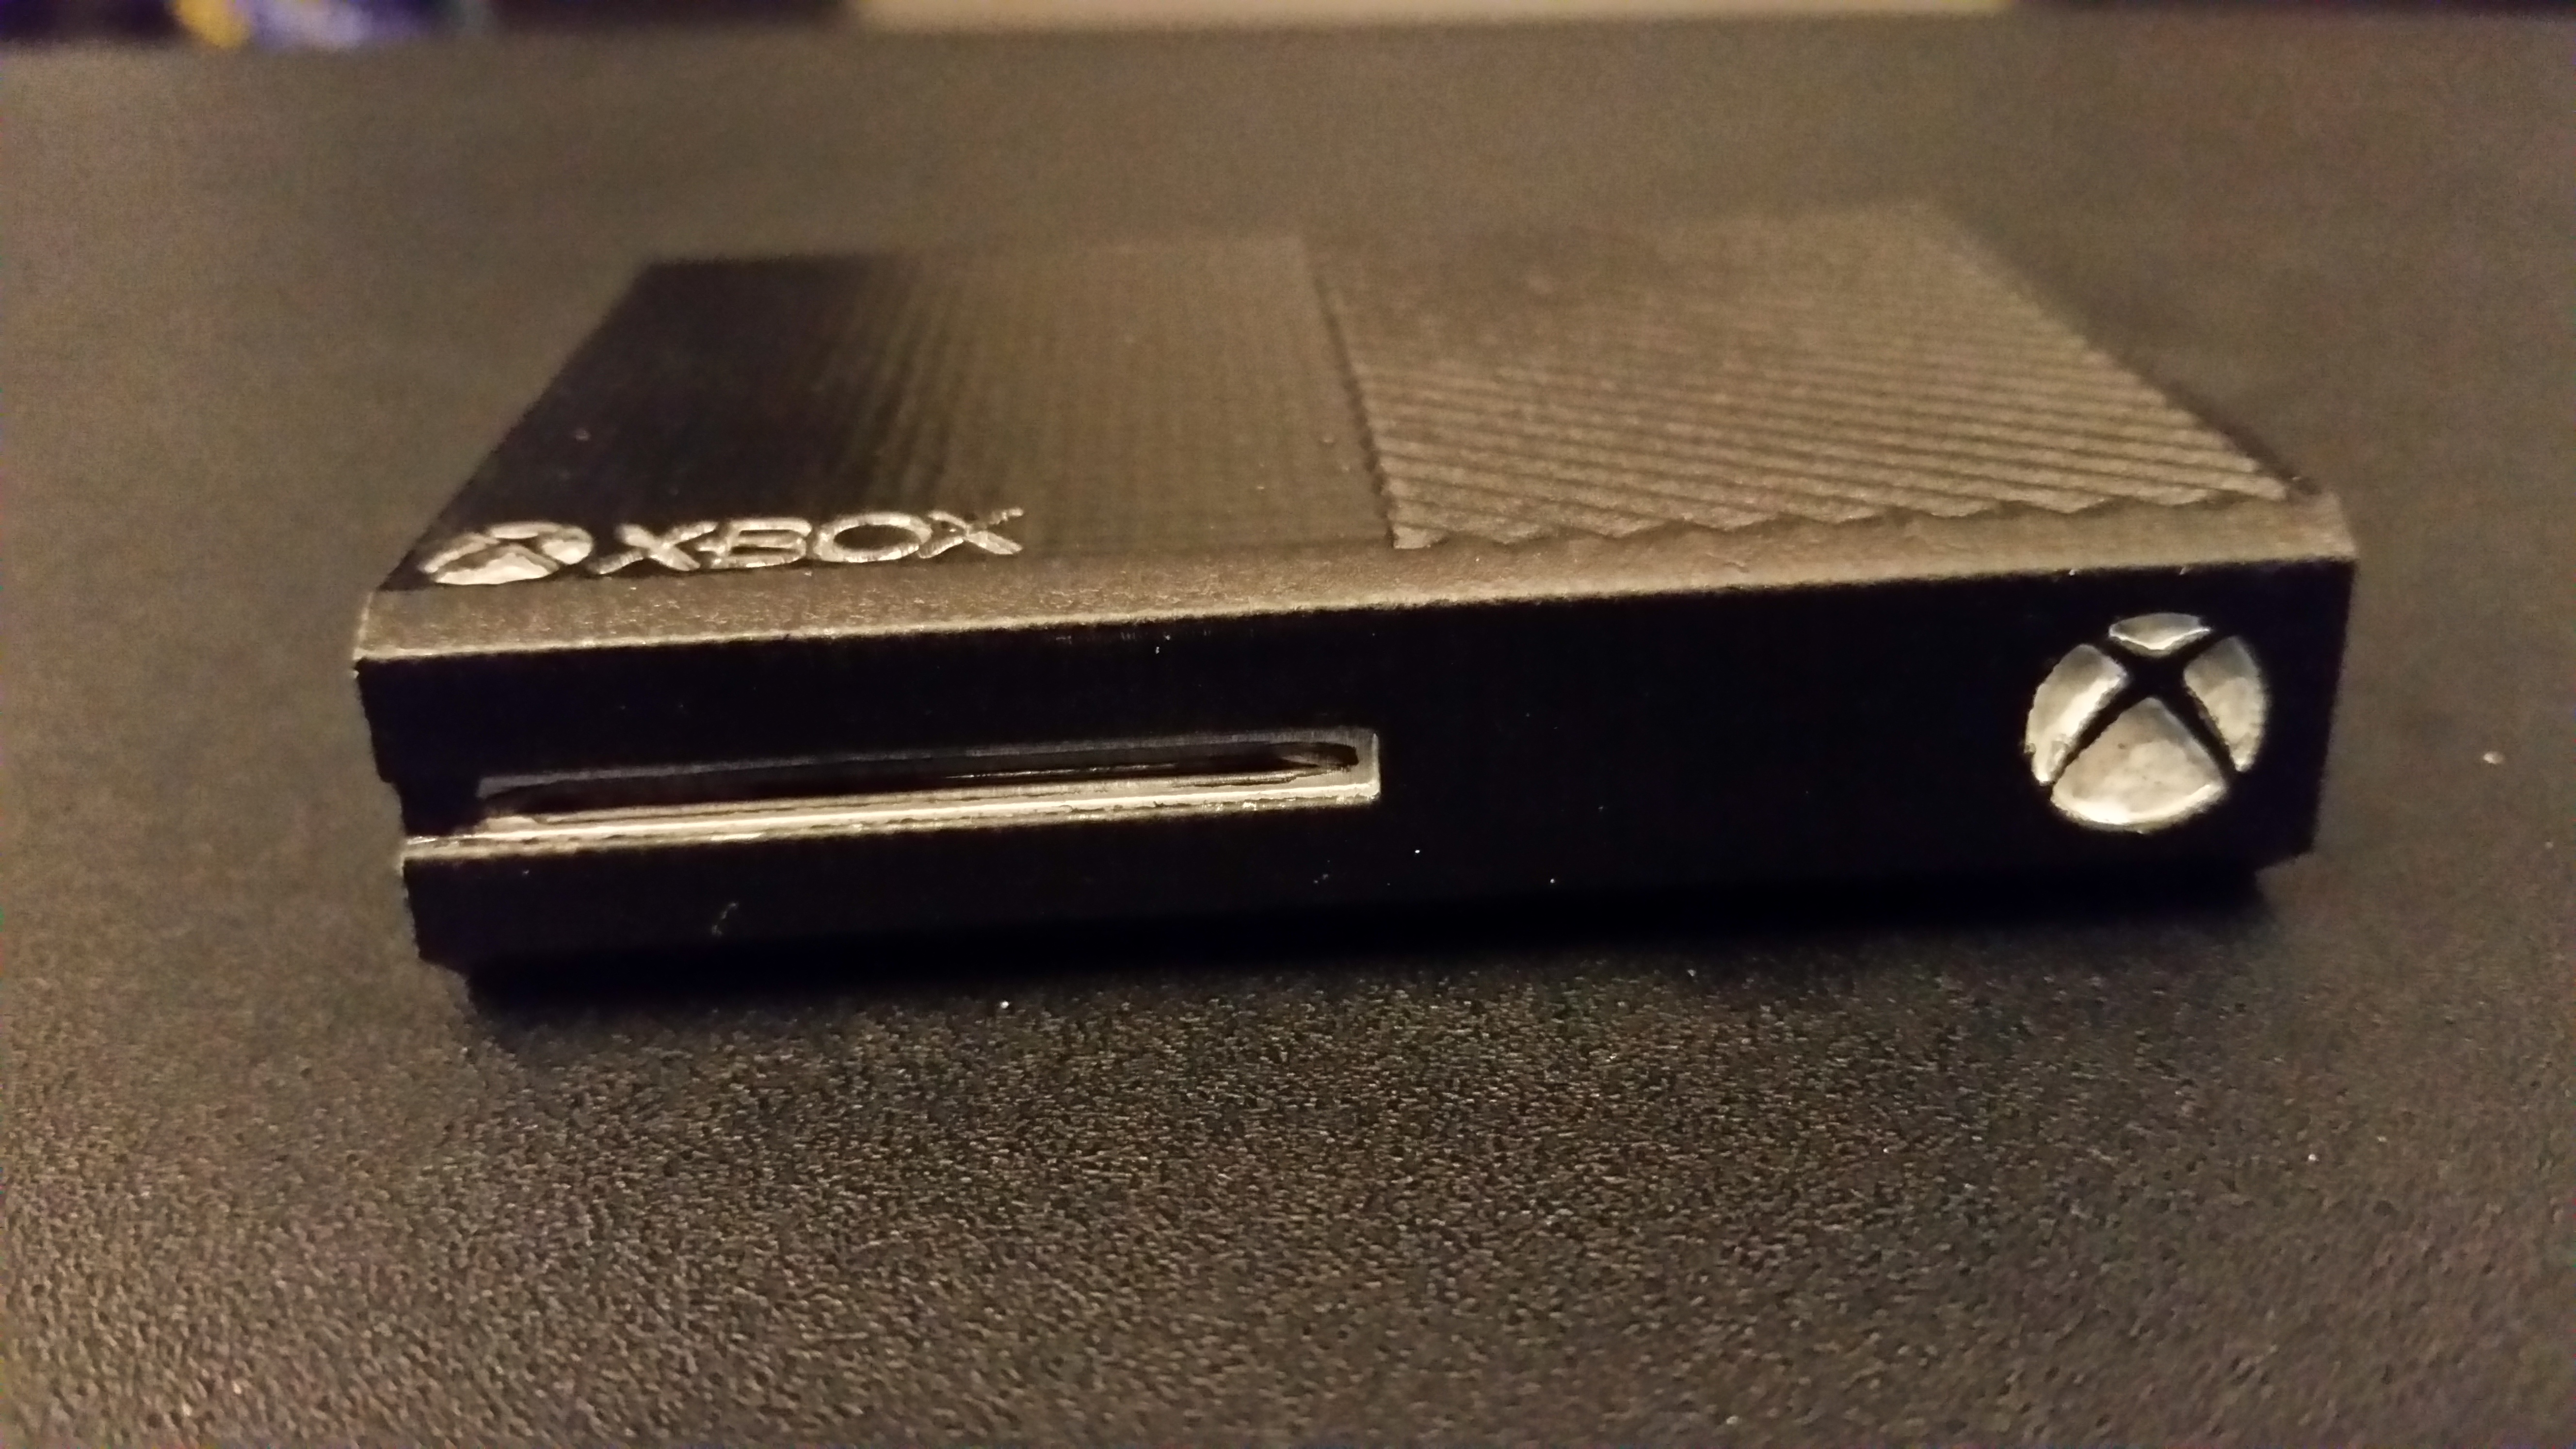 Small XBox One